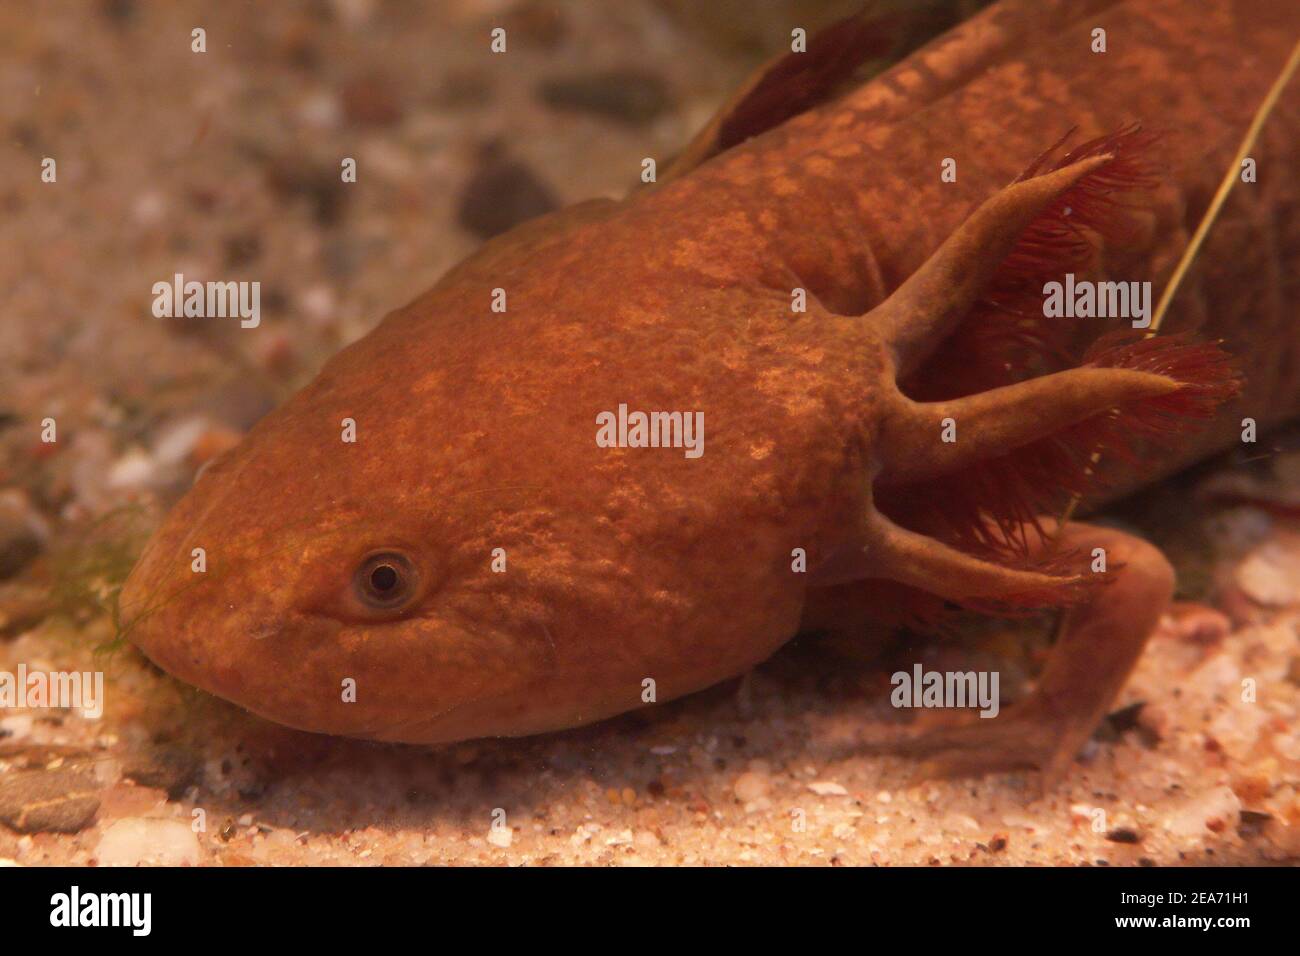 Closeup of the brown form of the Mexican achoque salamand Ambystoma mexicanum Stock Photo